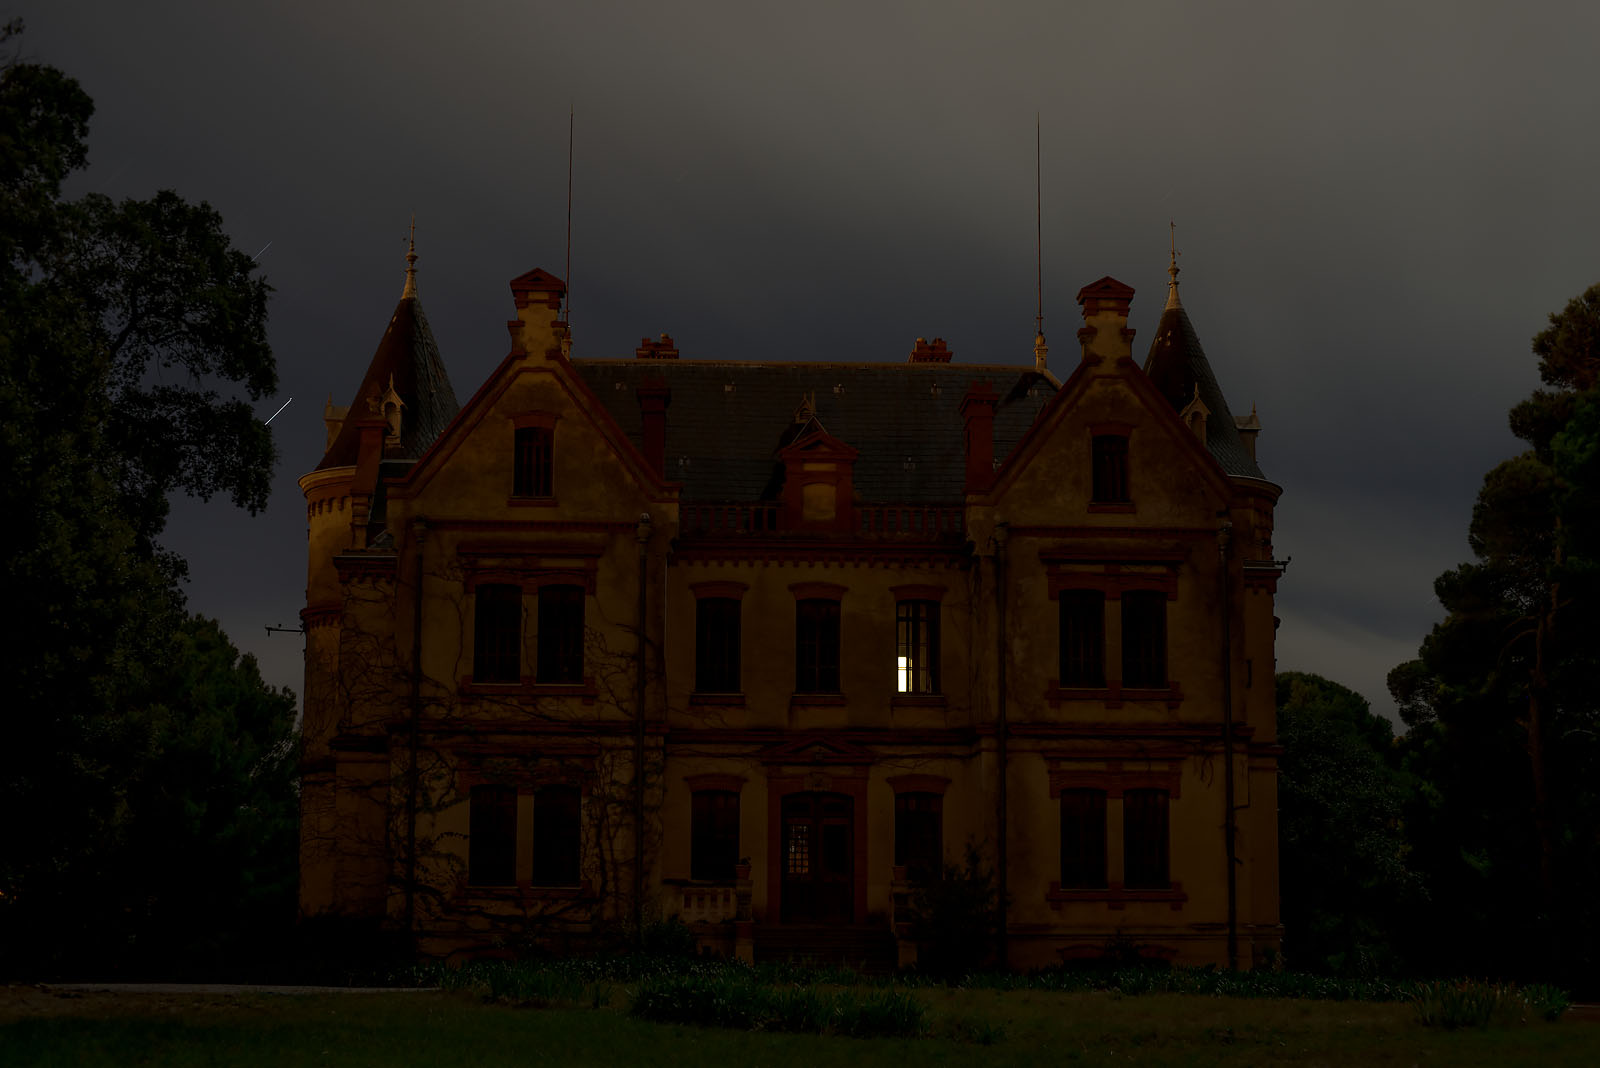 Eerie Chateau, Night: Fine Art Photography Commission